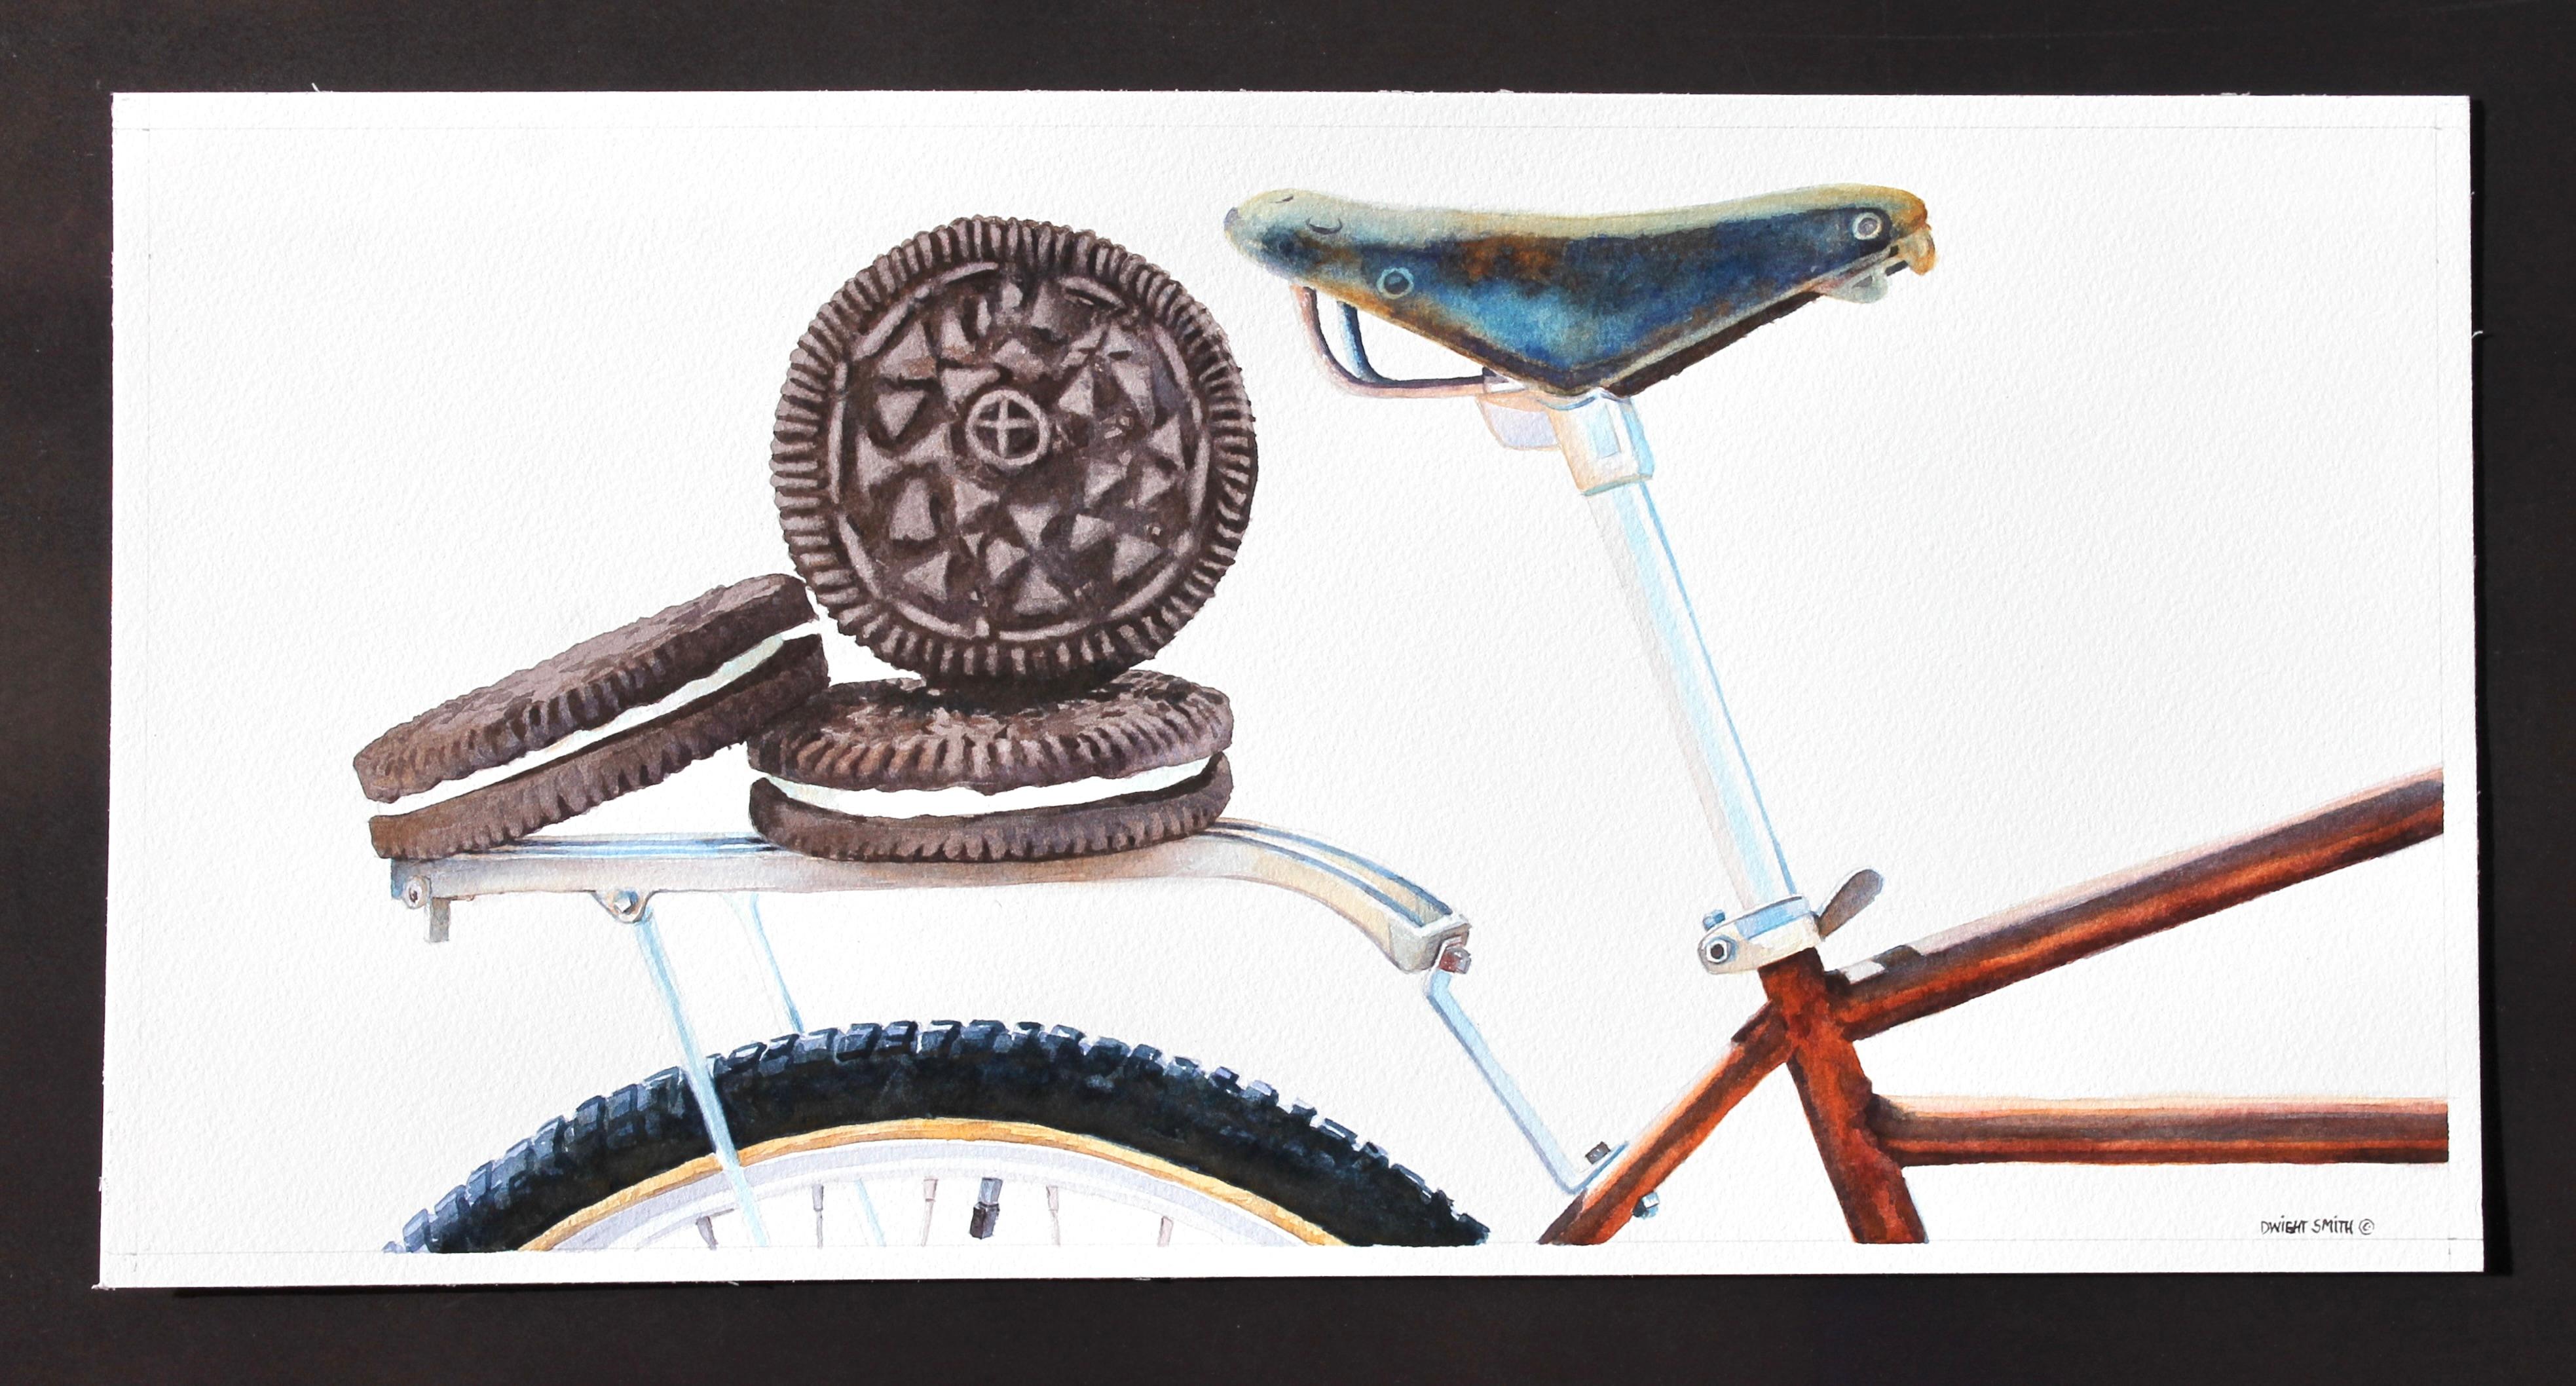 Cookie Ride, Original Painting - Surrealist Art by Dwight Smith